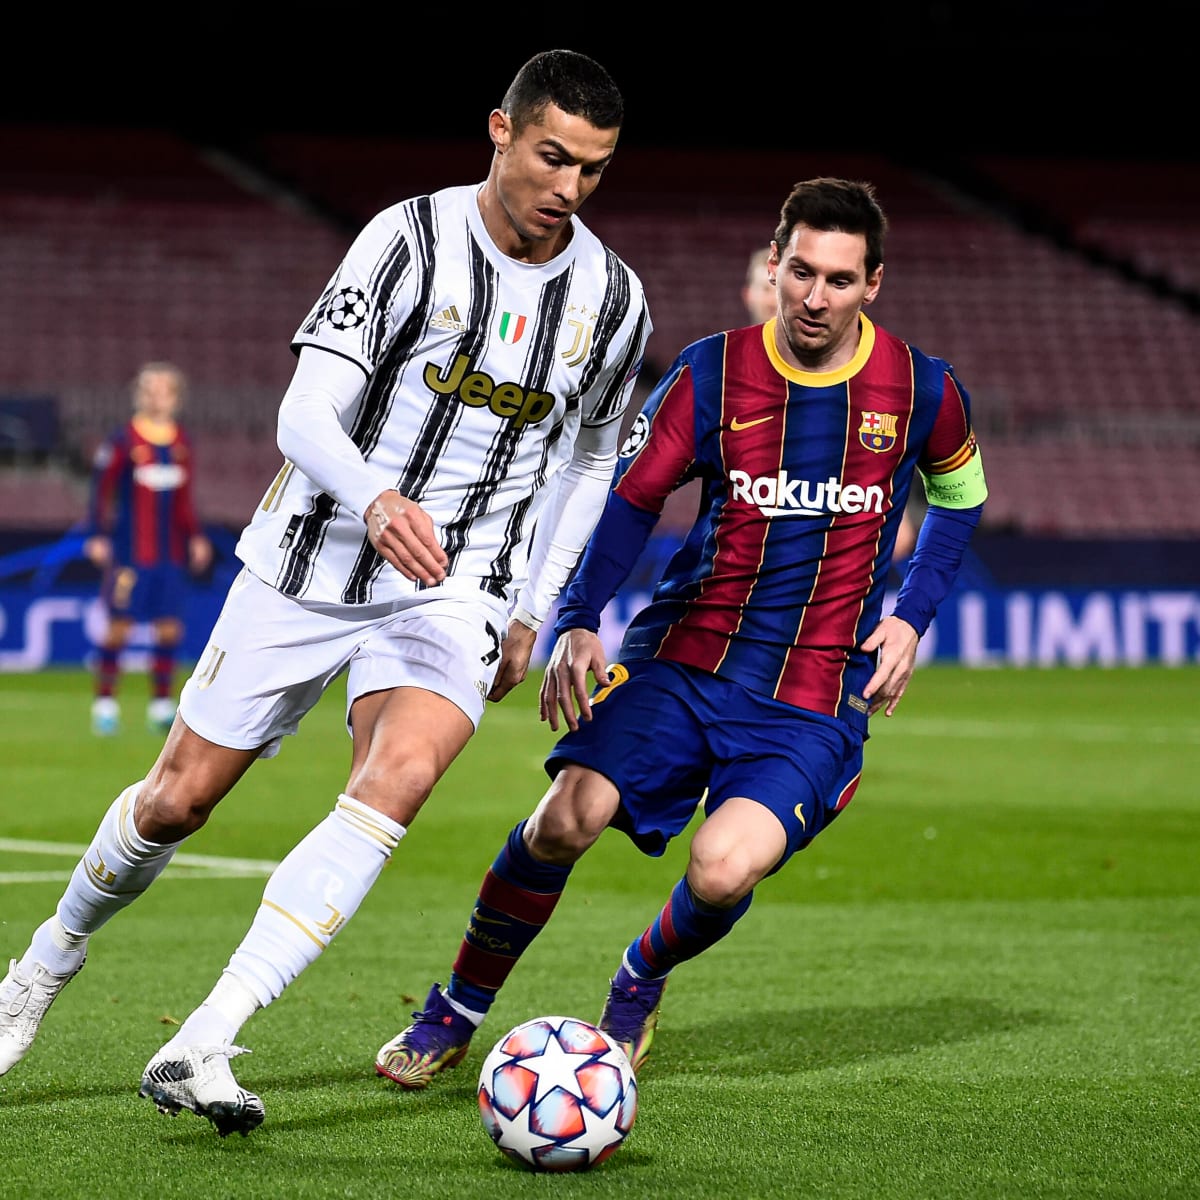 Messi and Ronaldo could play together in a UEFA All Star Game